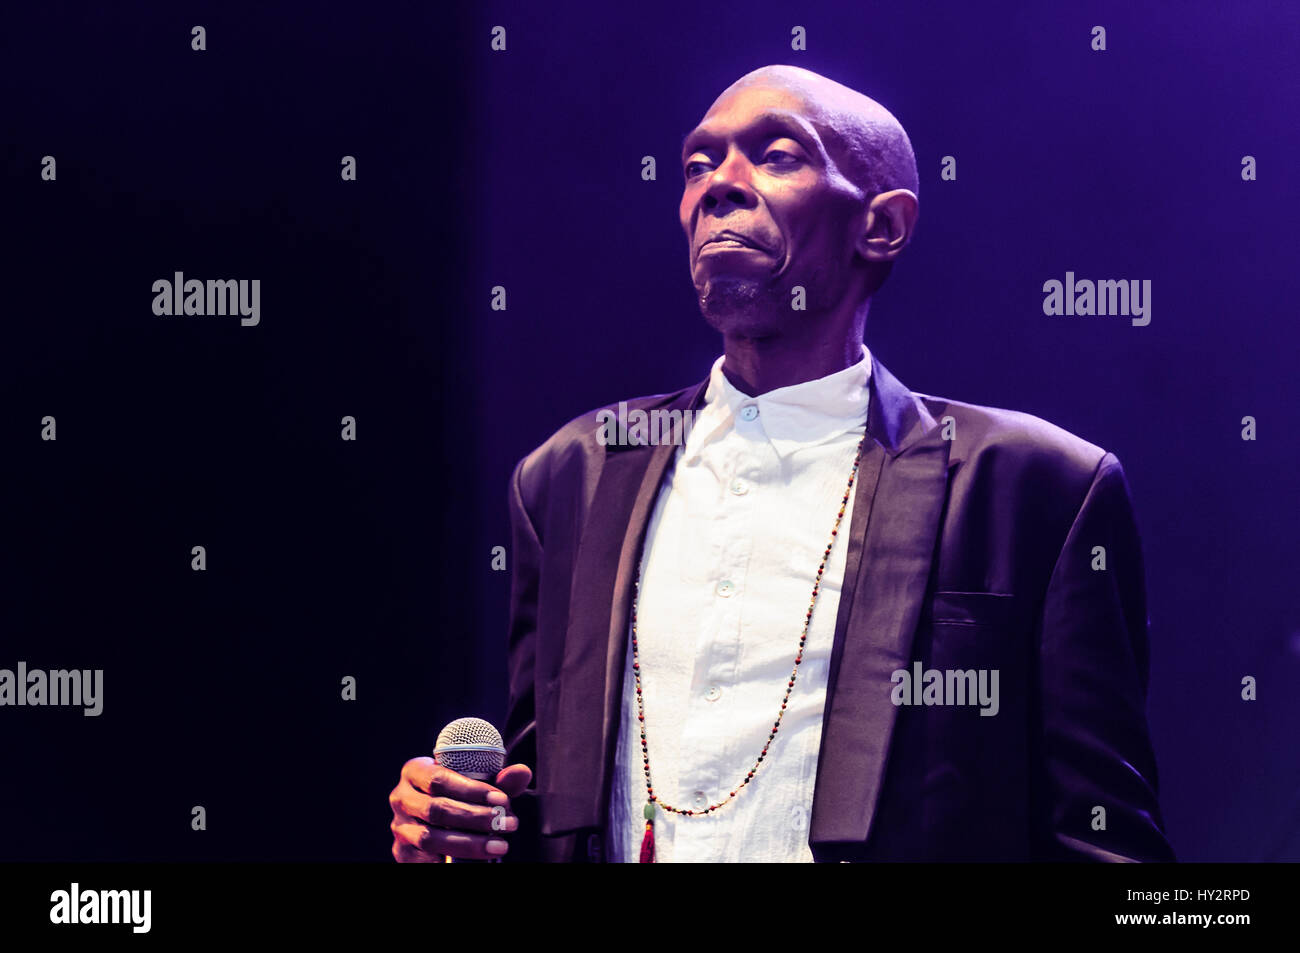 BELFAST, NORTHERN IRELAND. 11 JUN 2016: Lead singer of the British dance band 'Faithless', Maxi Jazz (born Maxwell Fraser) at the Belsonic festival in Belfast. Stock Photo